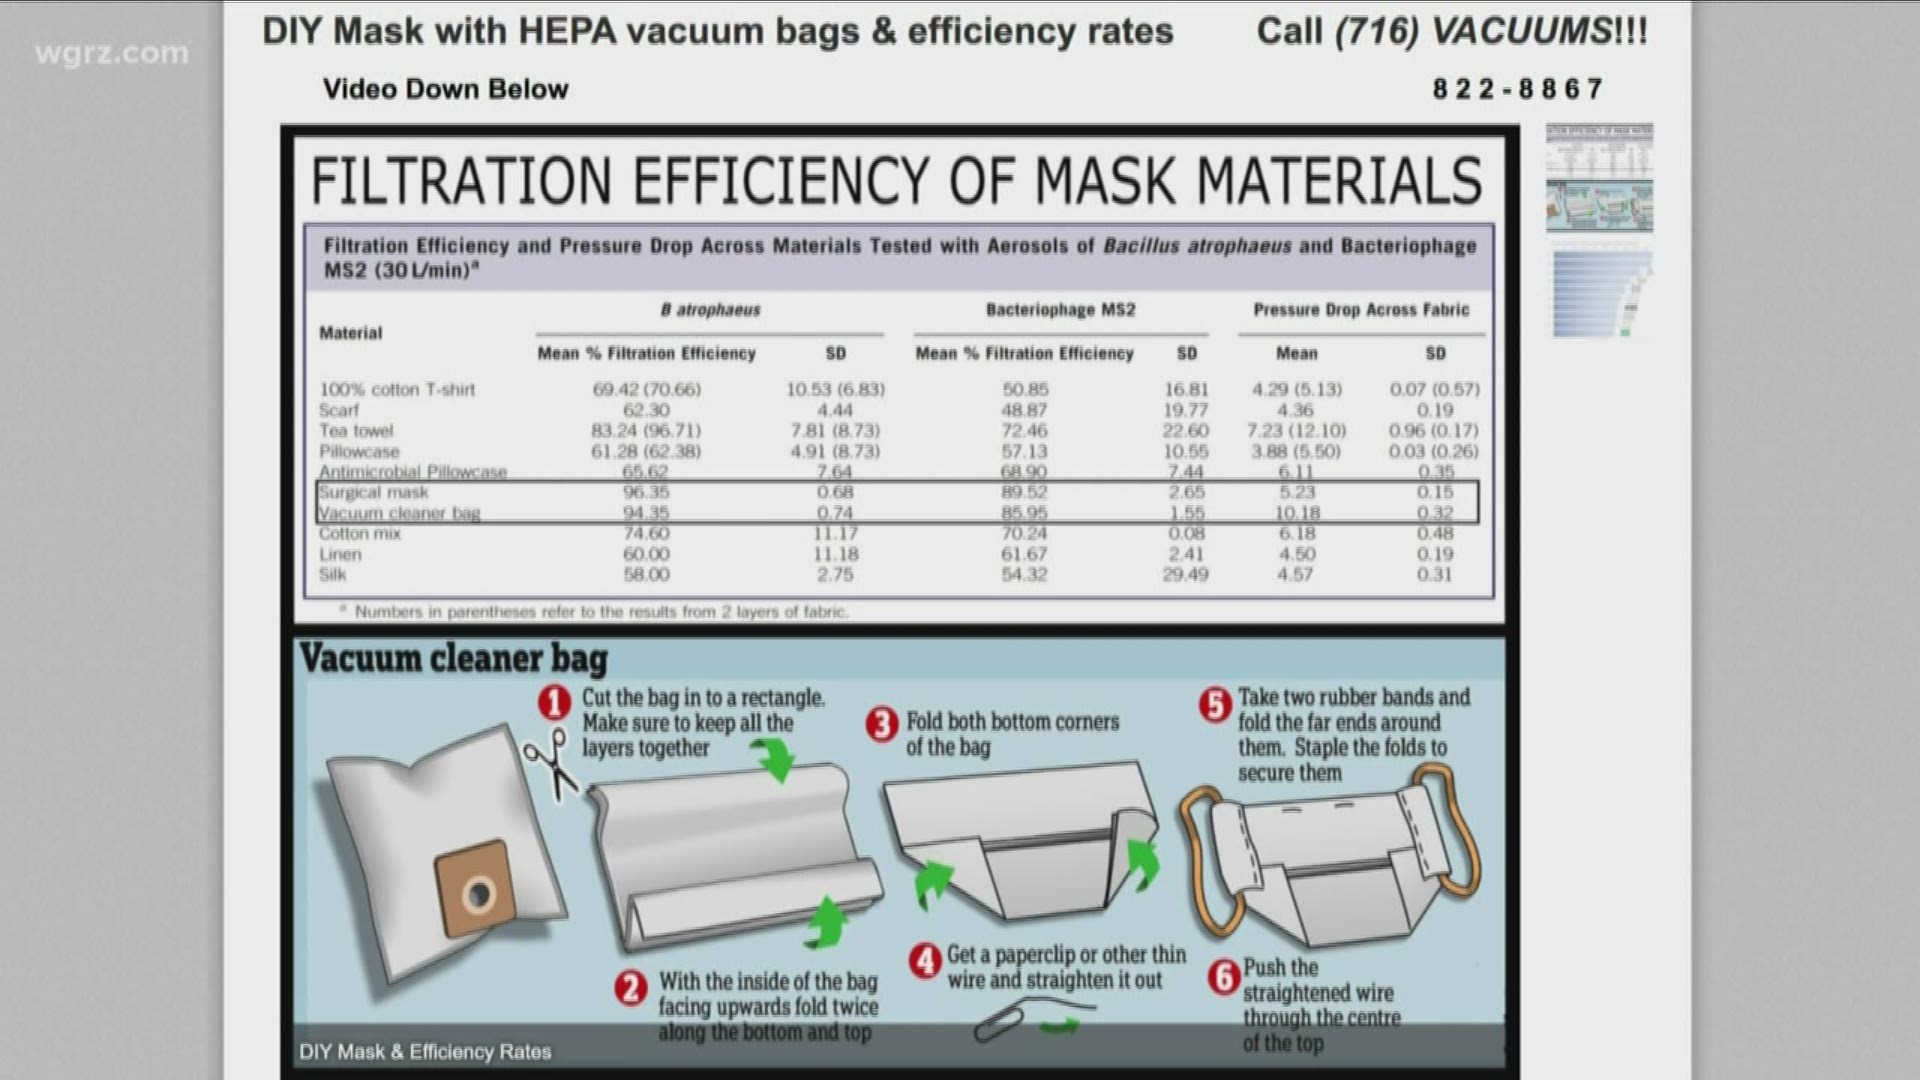 Super Vacuums says it has seen a lot of people requesting HEPA filters to craft their own masks.